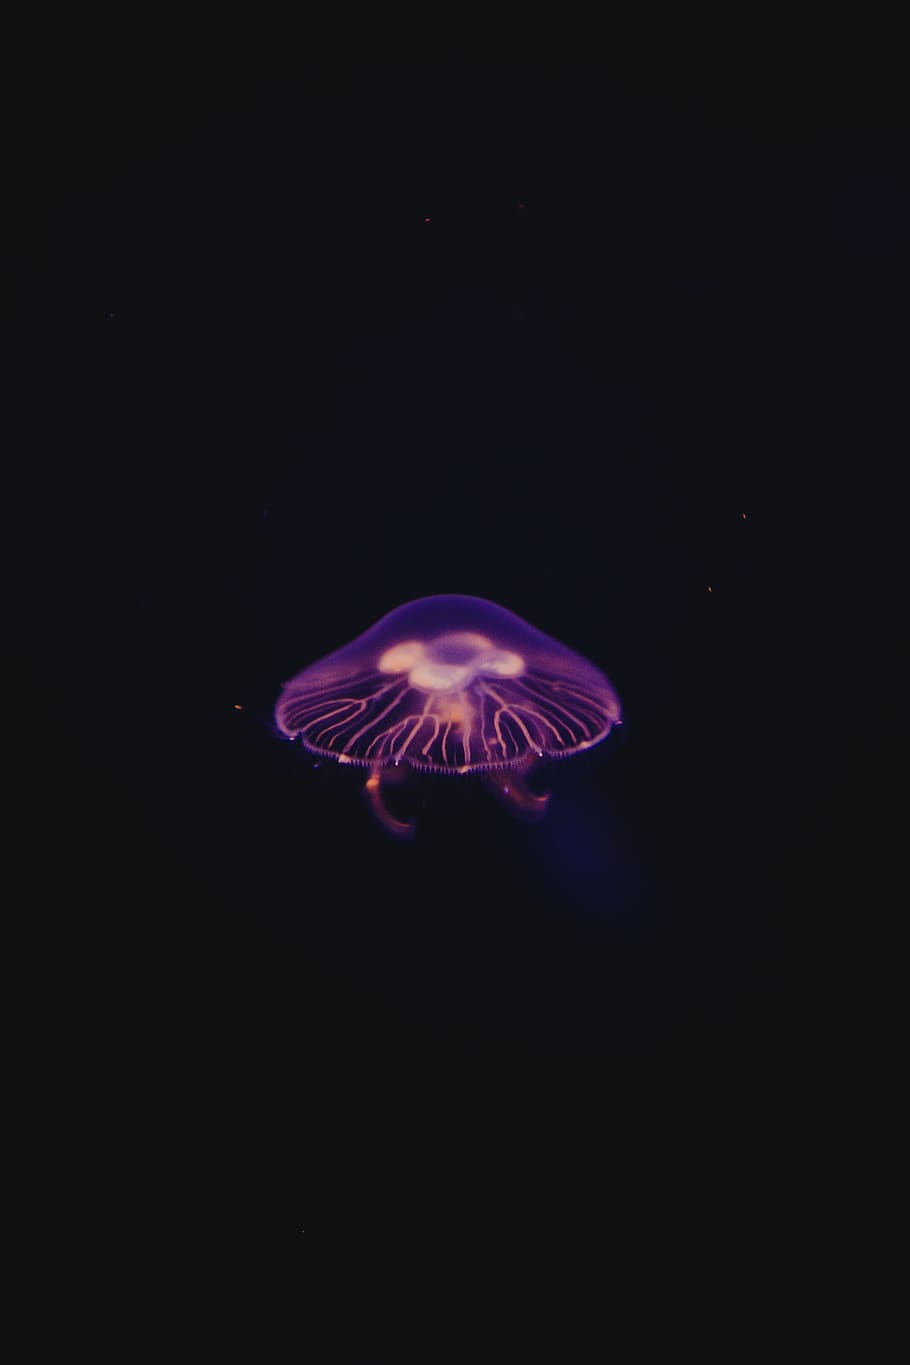 HD wallpaper: A purple jellyfish with a black background., iphone wallpapers  | Wallpaper Flare